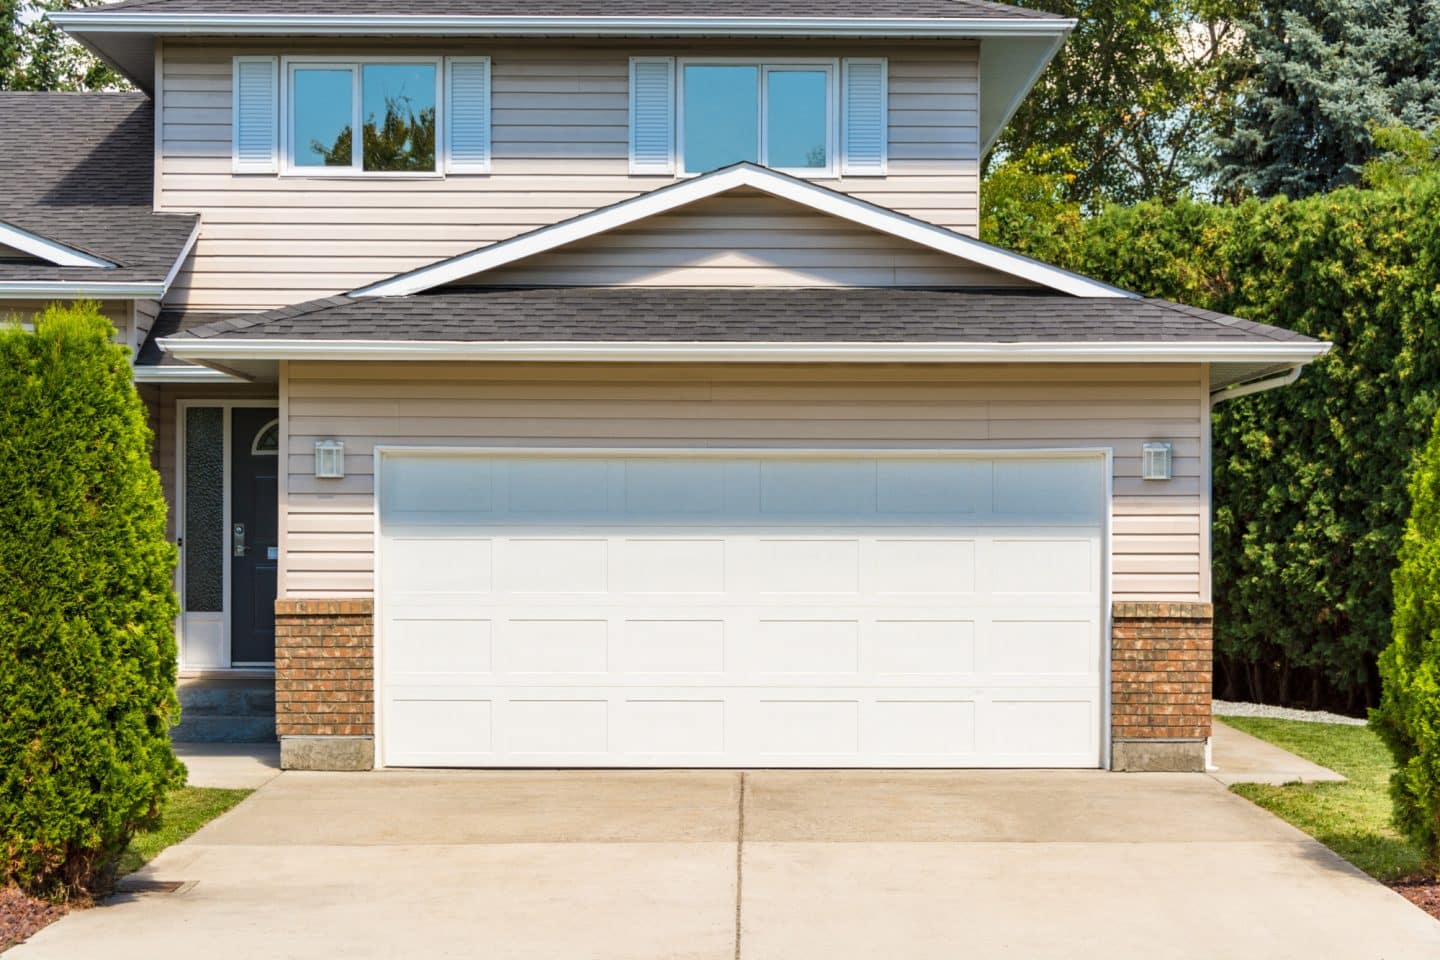 7 Common Garage Door Maintenance Mistakes and How to Avoid Them